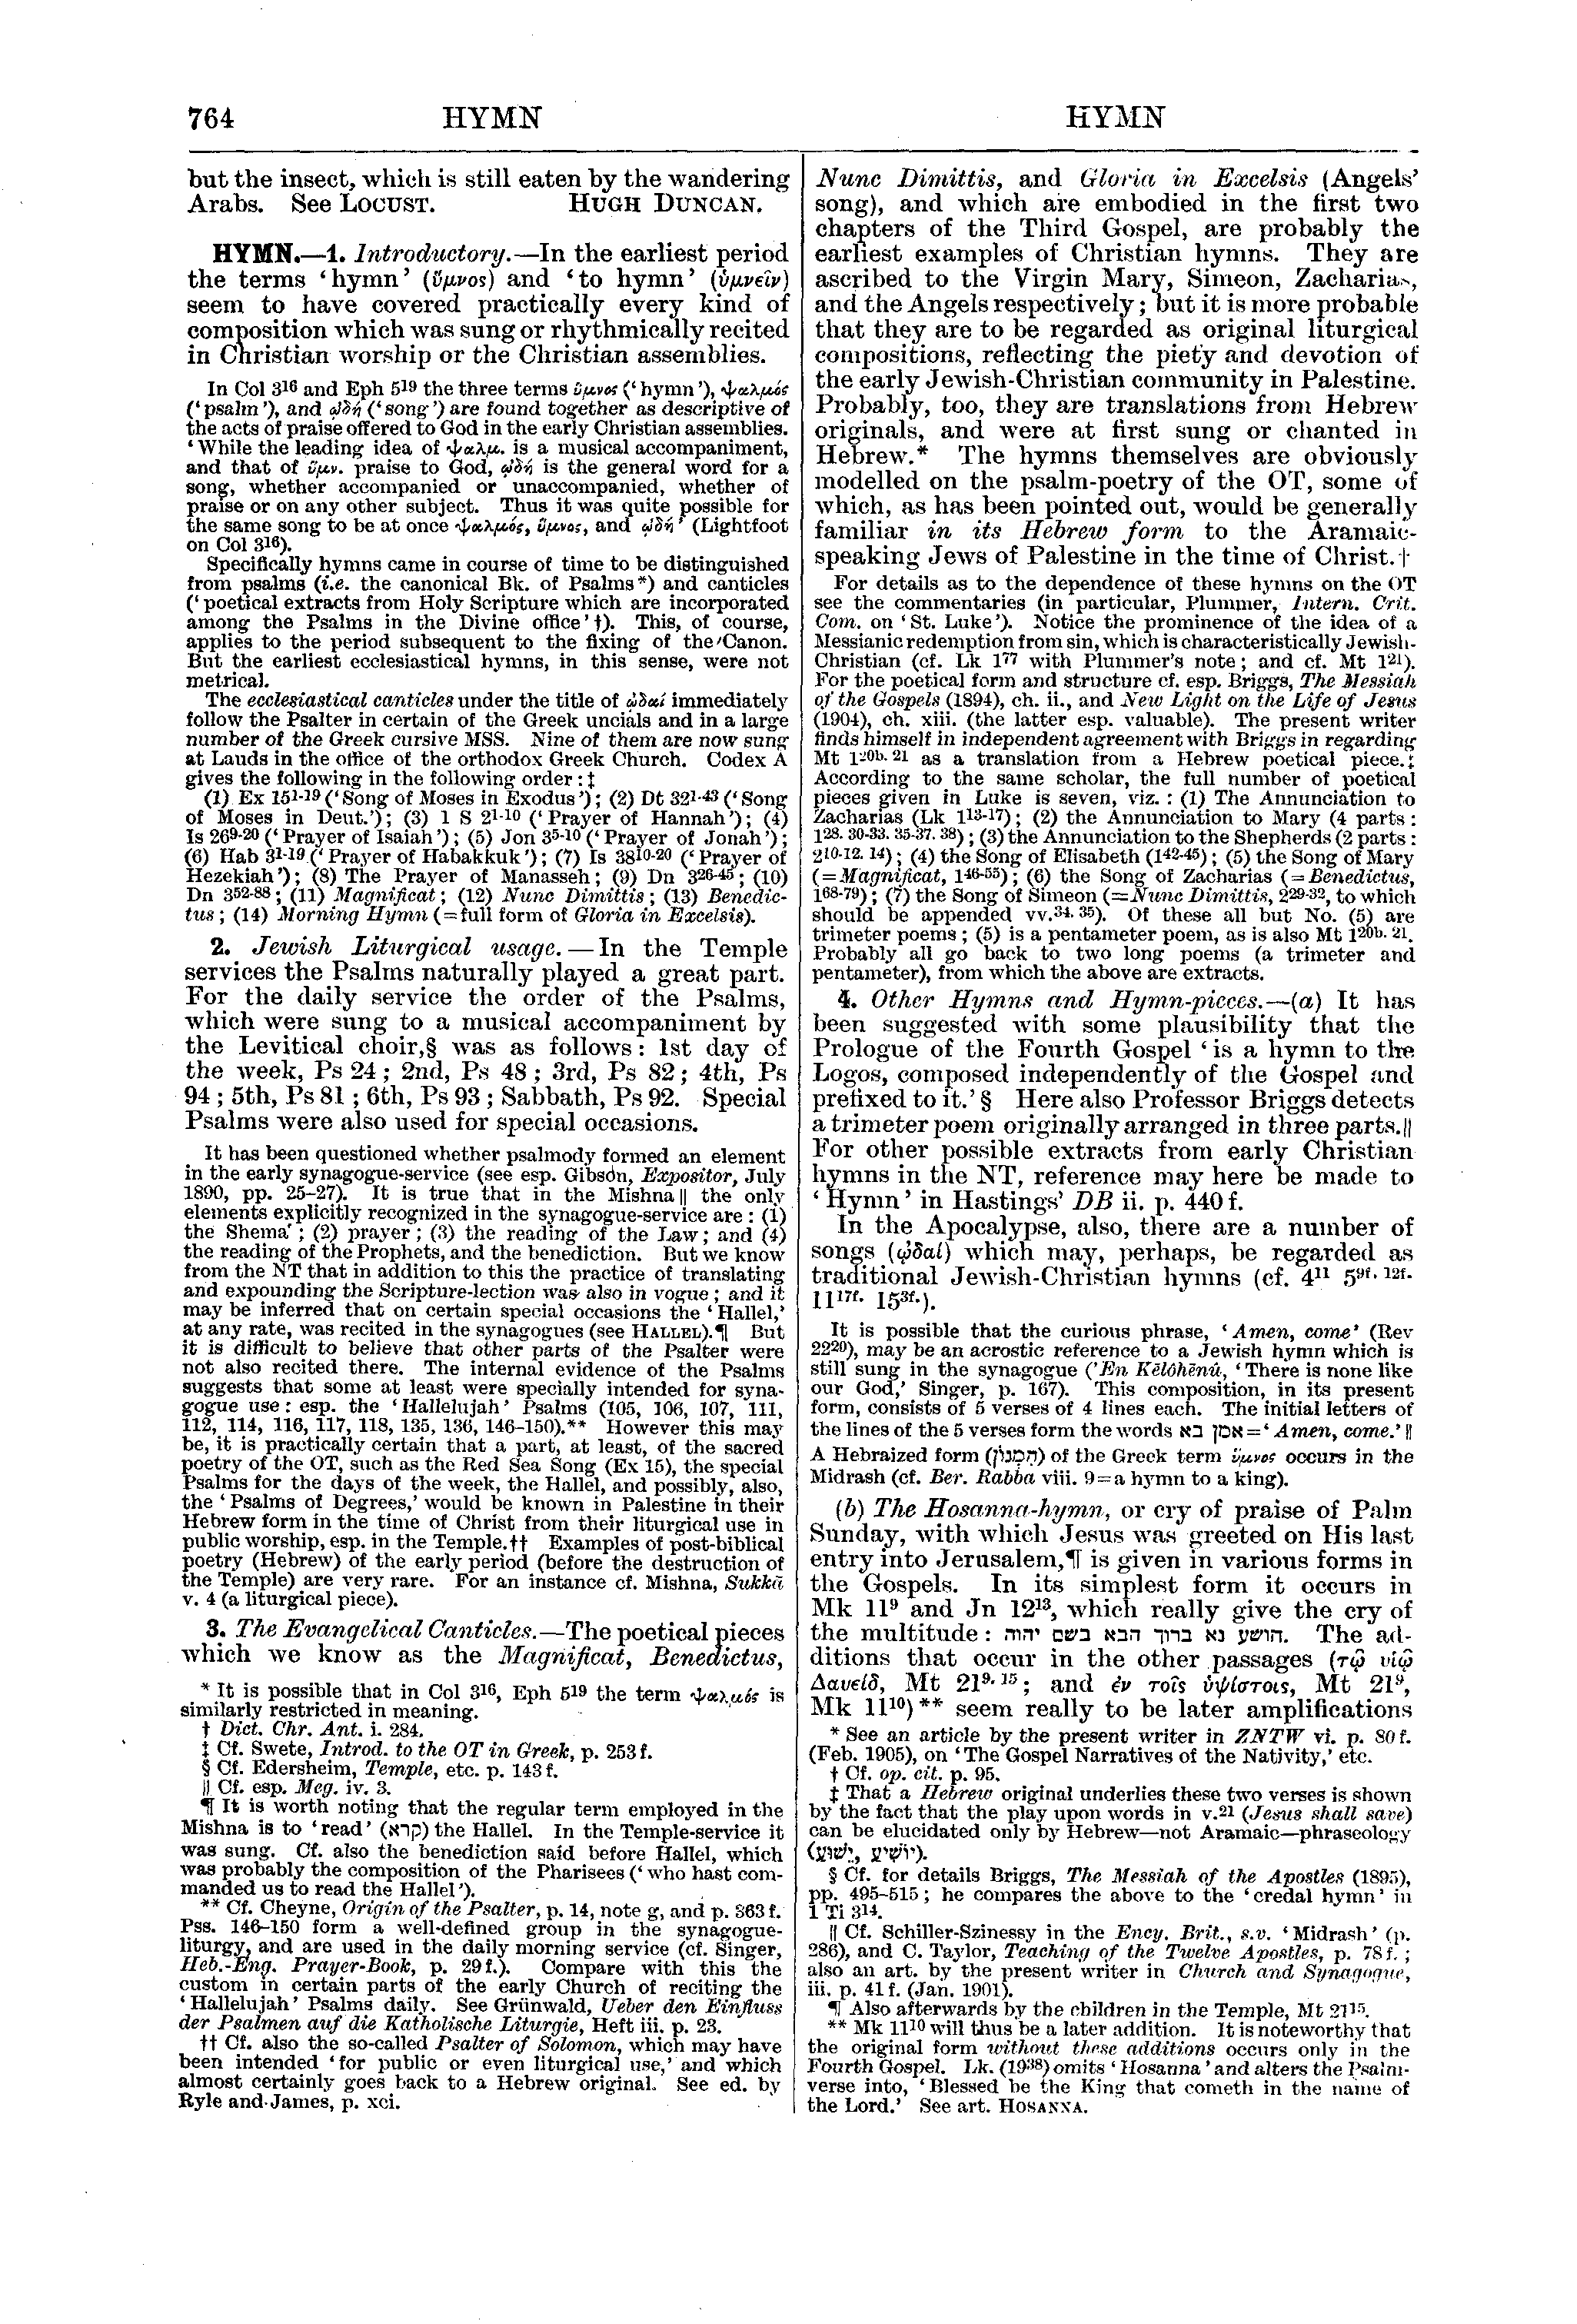 Image of page 764